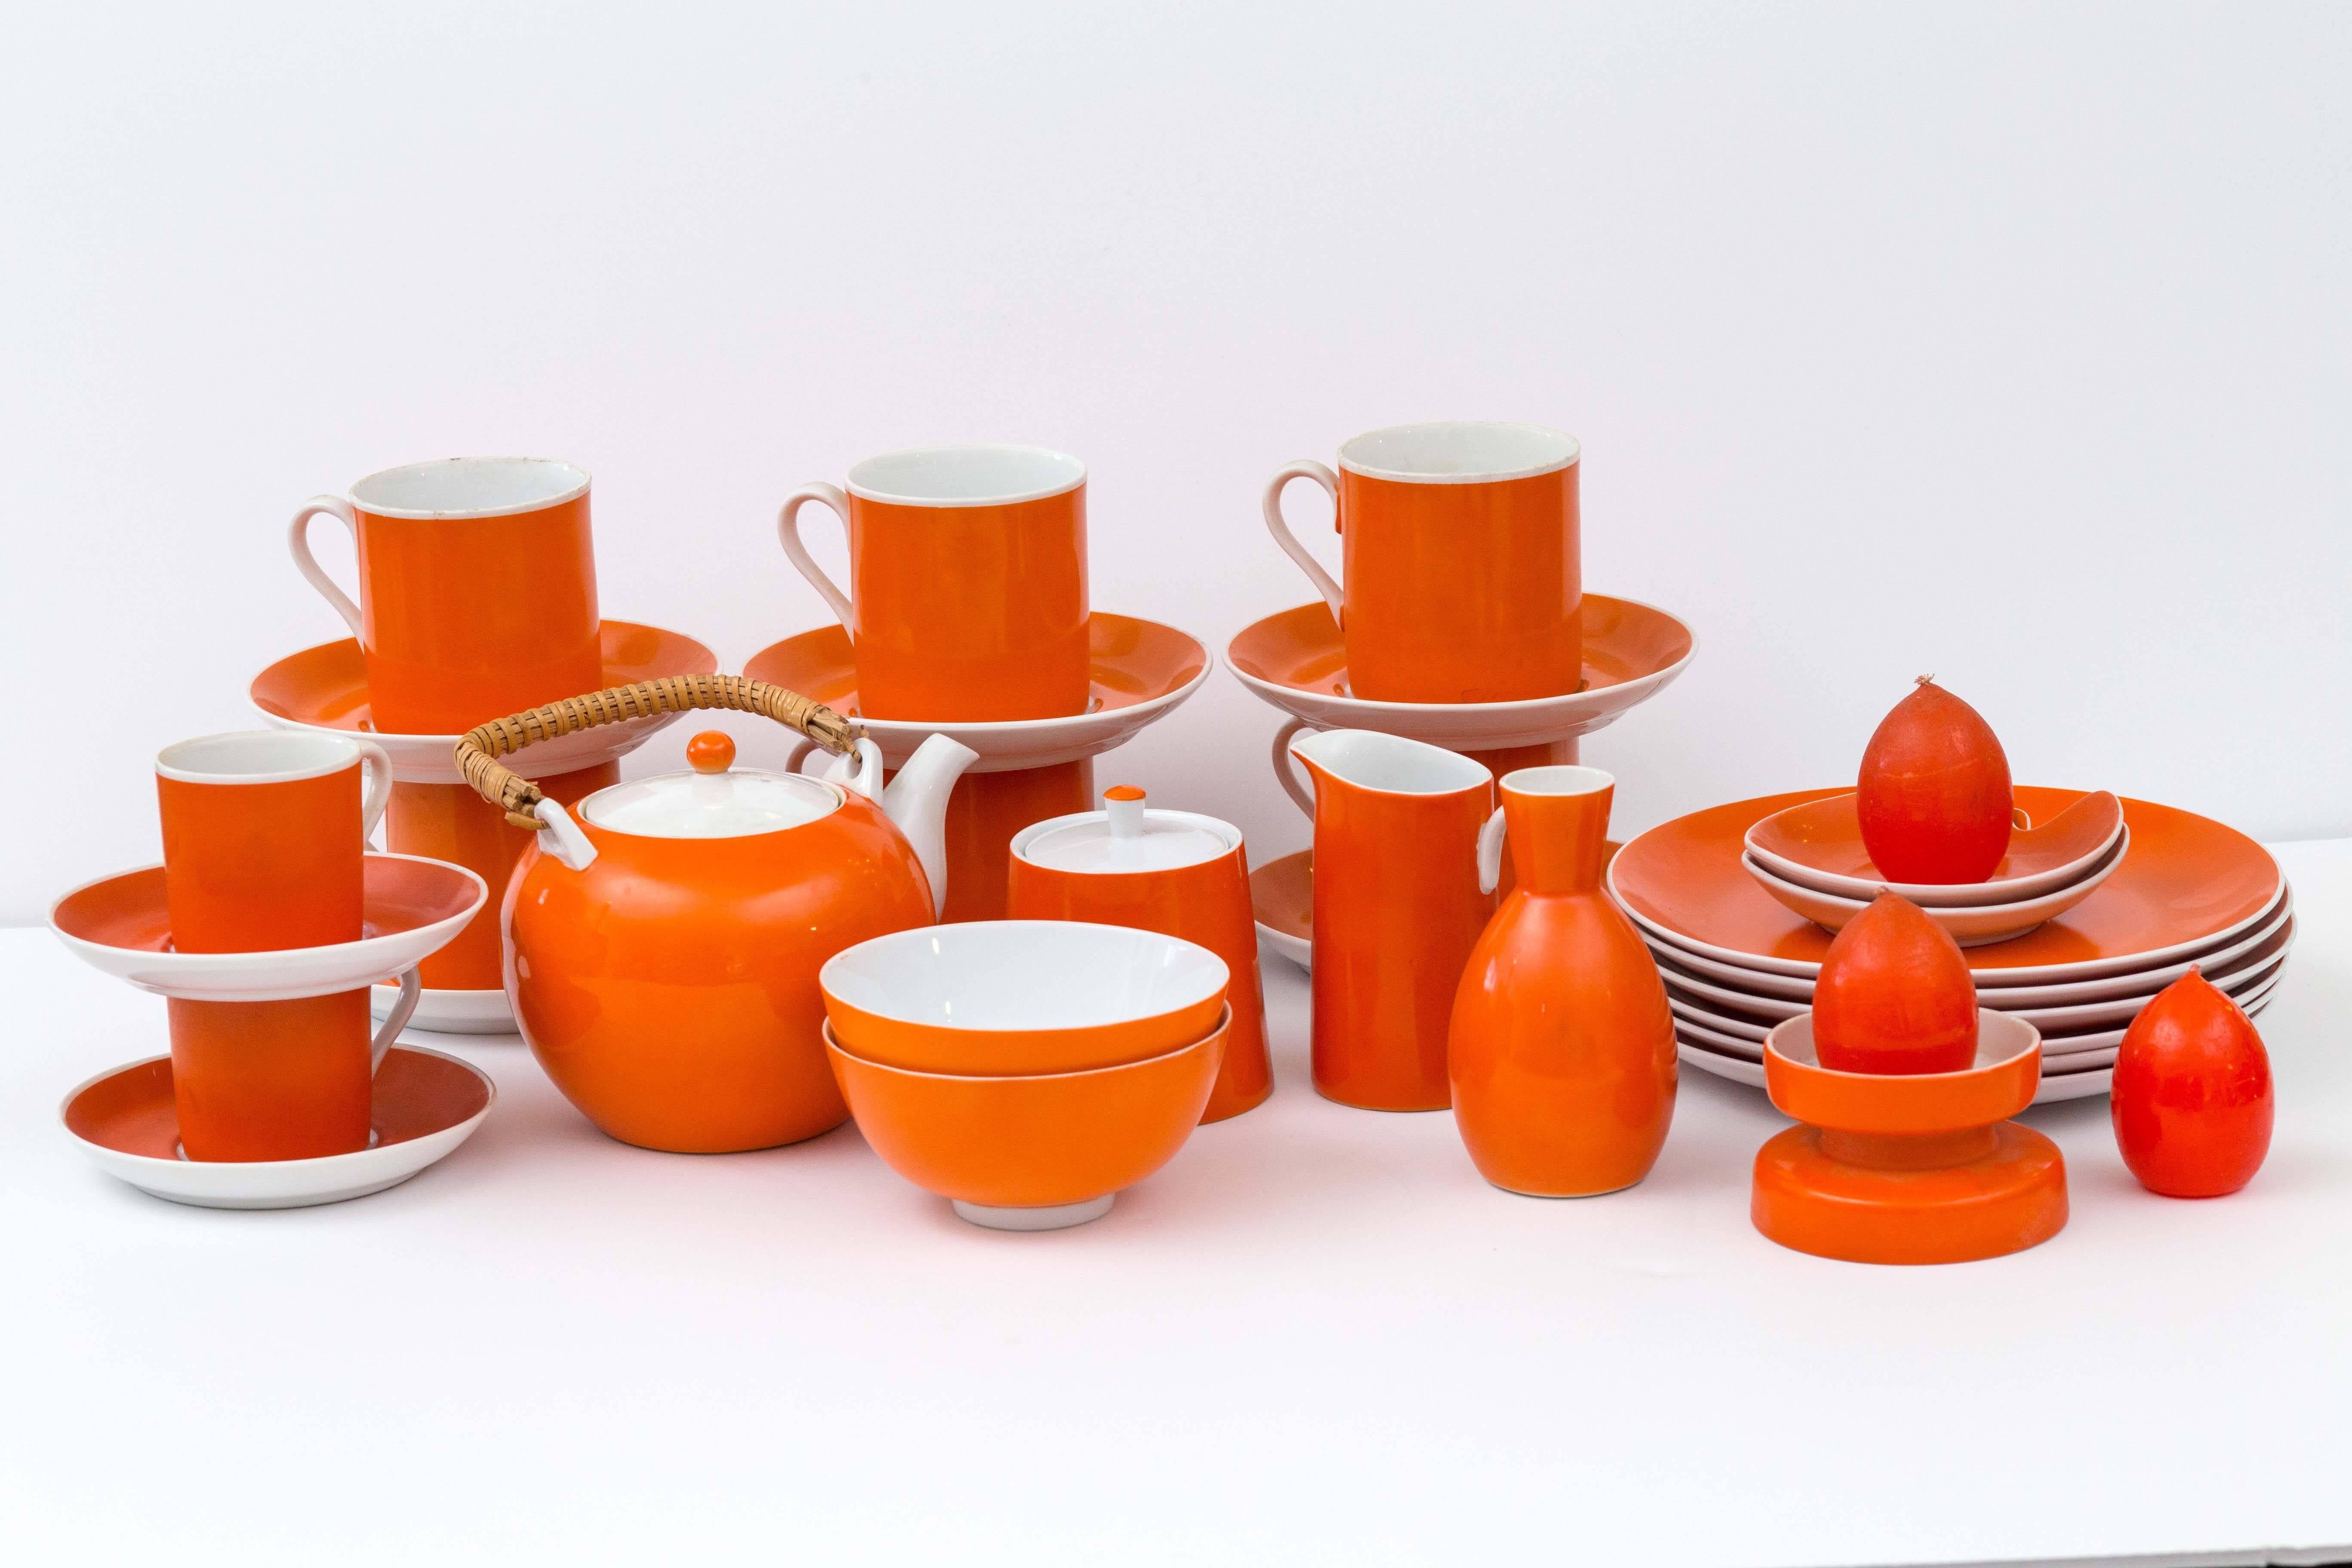 A 31 piece vintage porcelain Tangerine orange dessert set (and same colored candles). A Mid-Century Tangerine Orange adds a Pop of Life and as Frank Sinatra said 